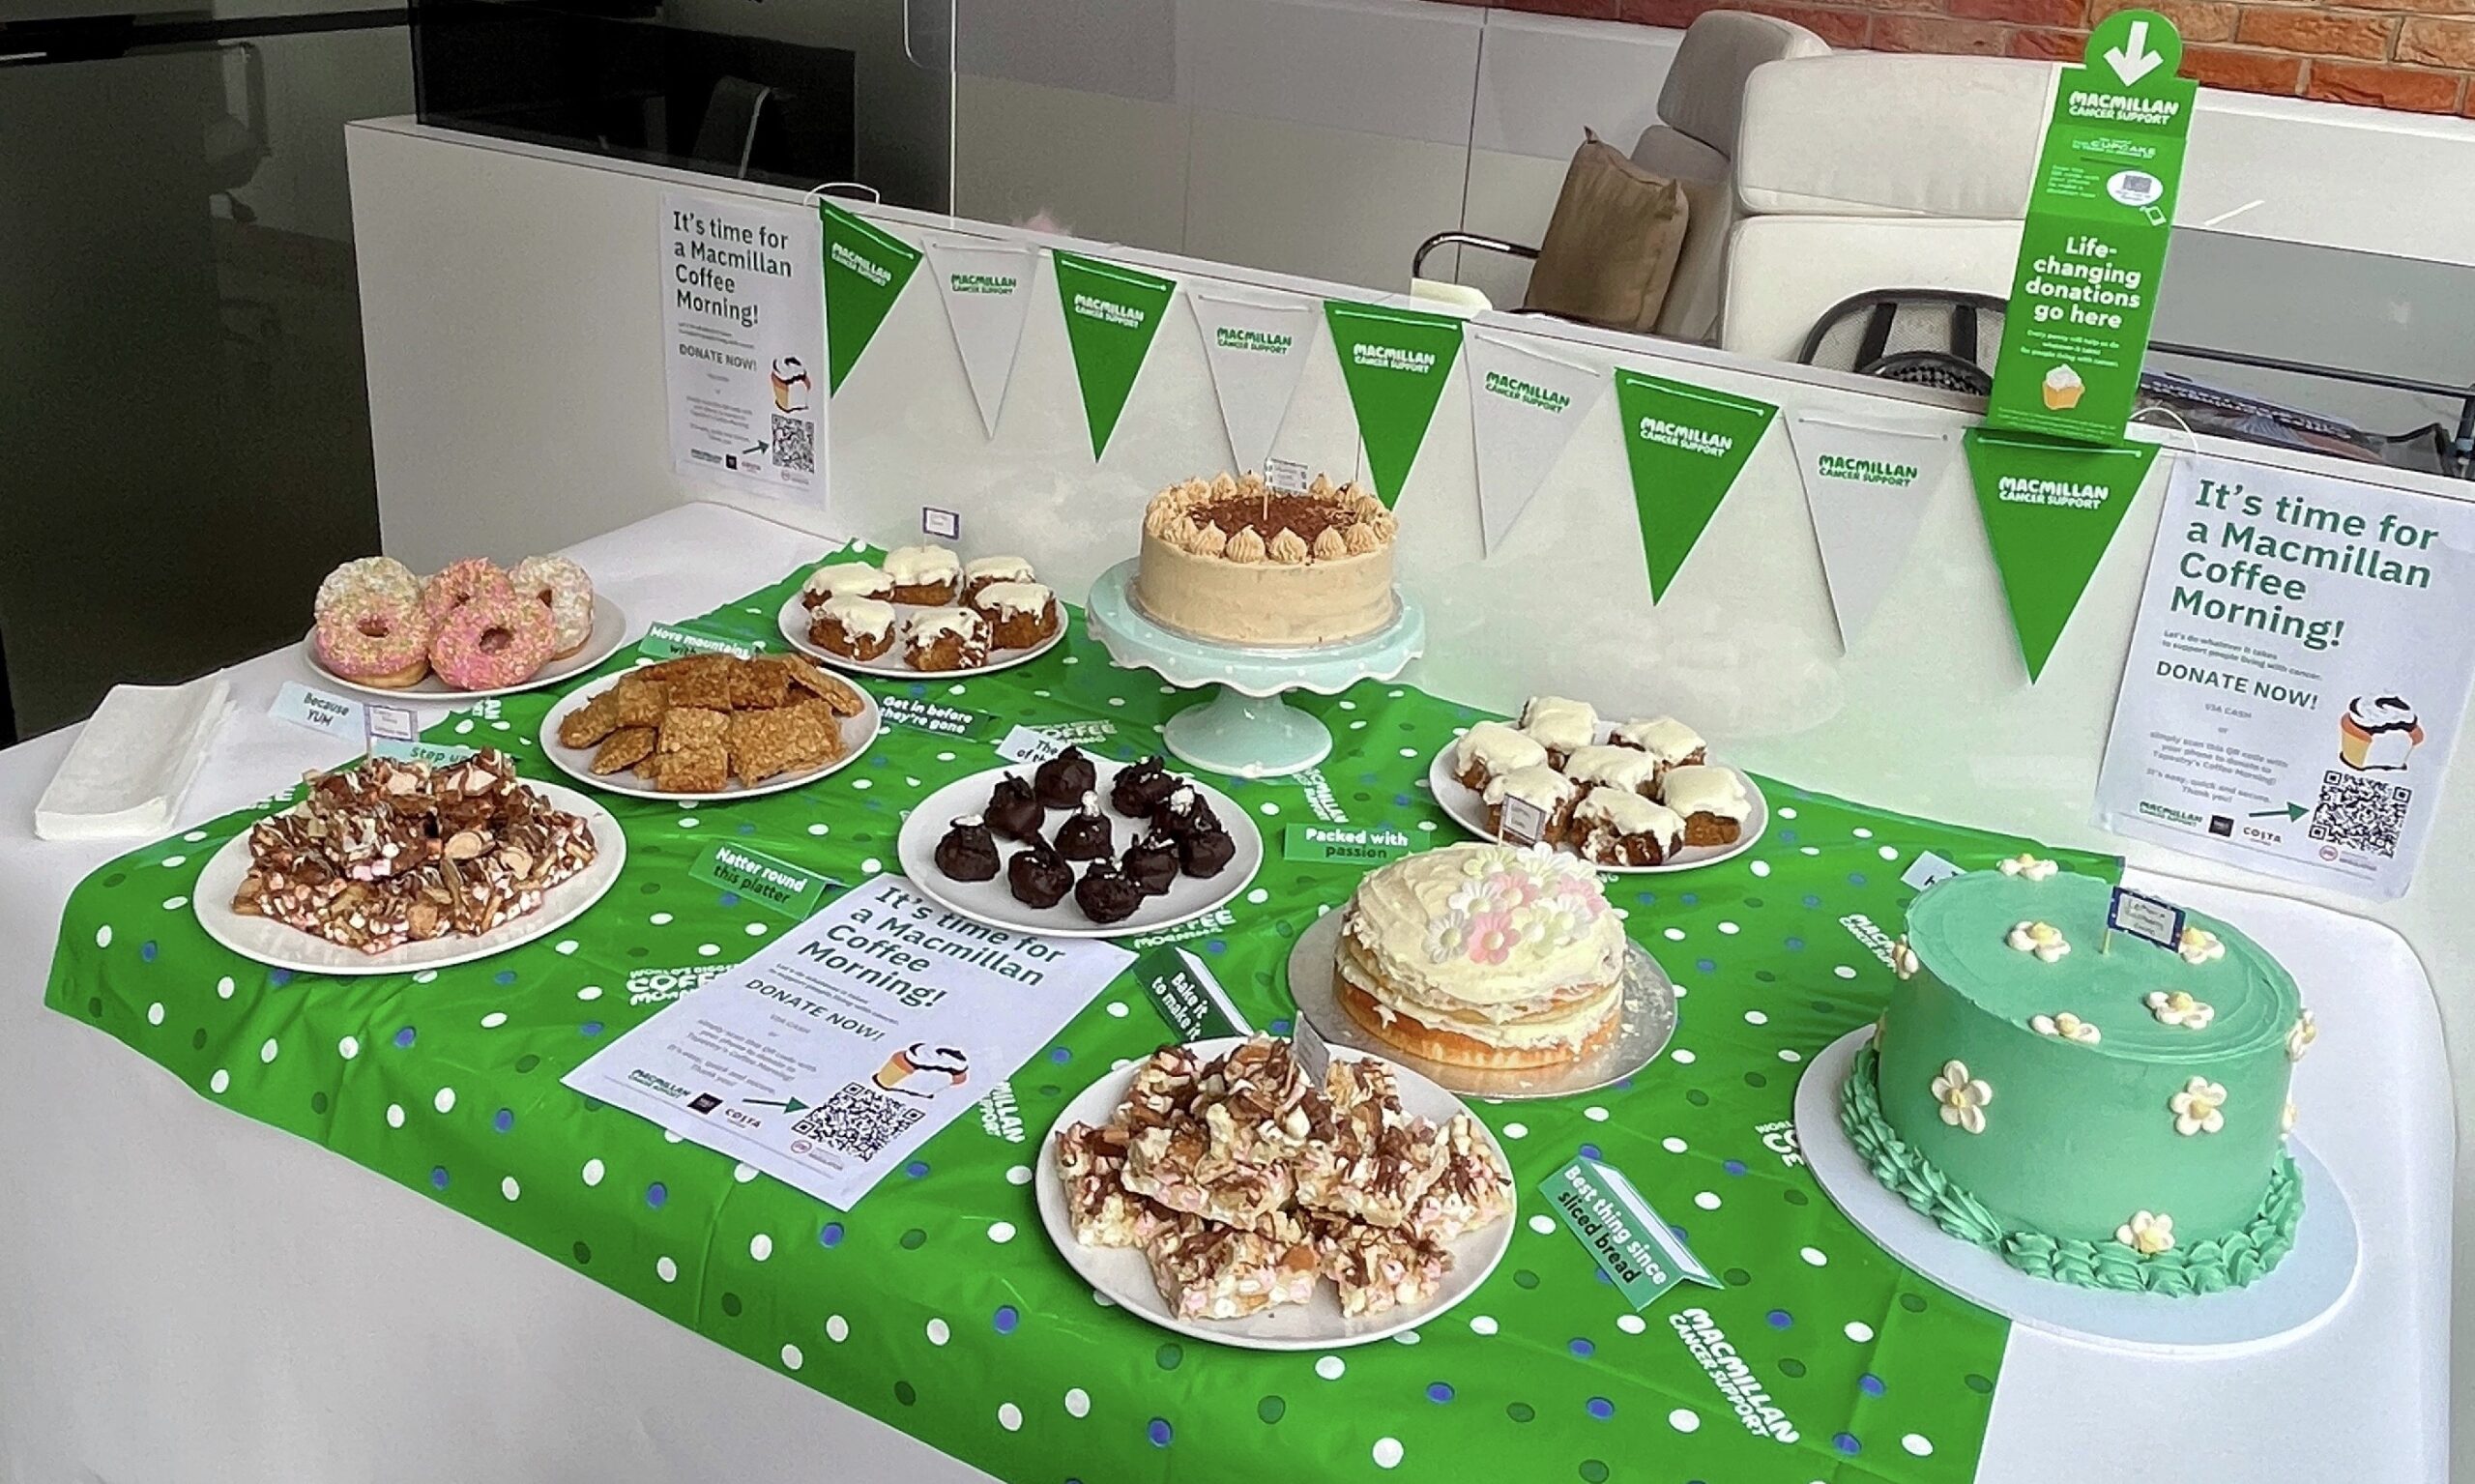 Tapestry-soho-frith-street-london-macmillan-cancer-support-the-worlds-biggest-coffee-morning-research-charity-bake-sale-fundraiser-autumn